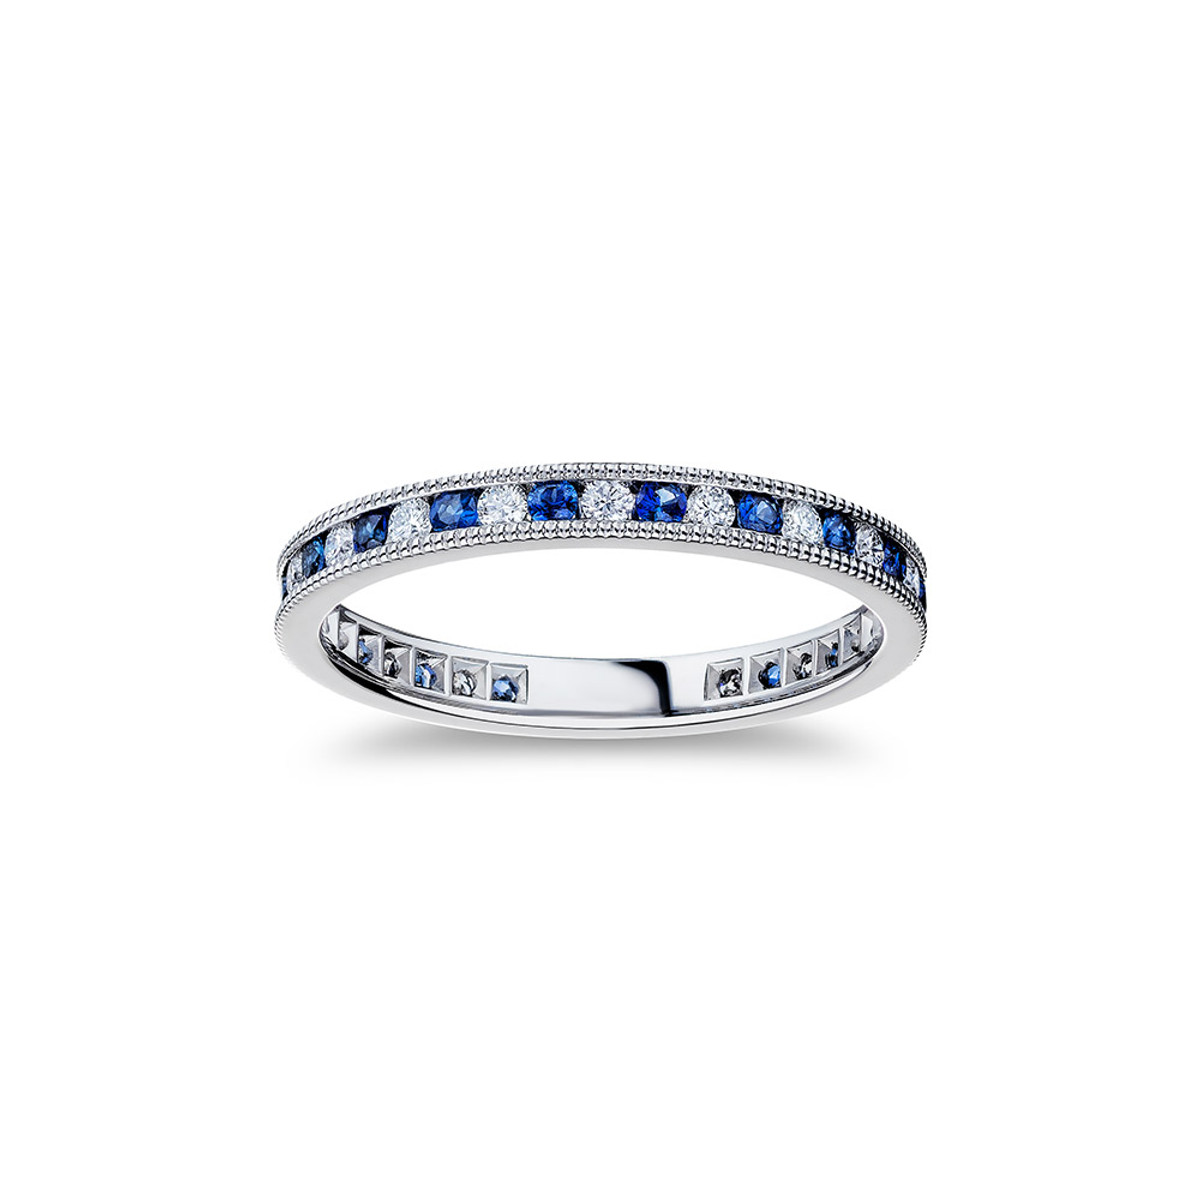 PLATINUM DIAMOND AND SAPPHIRE BAND 19D=0.32CTTW 19S=0.38CTTW-43572 Product Image